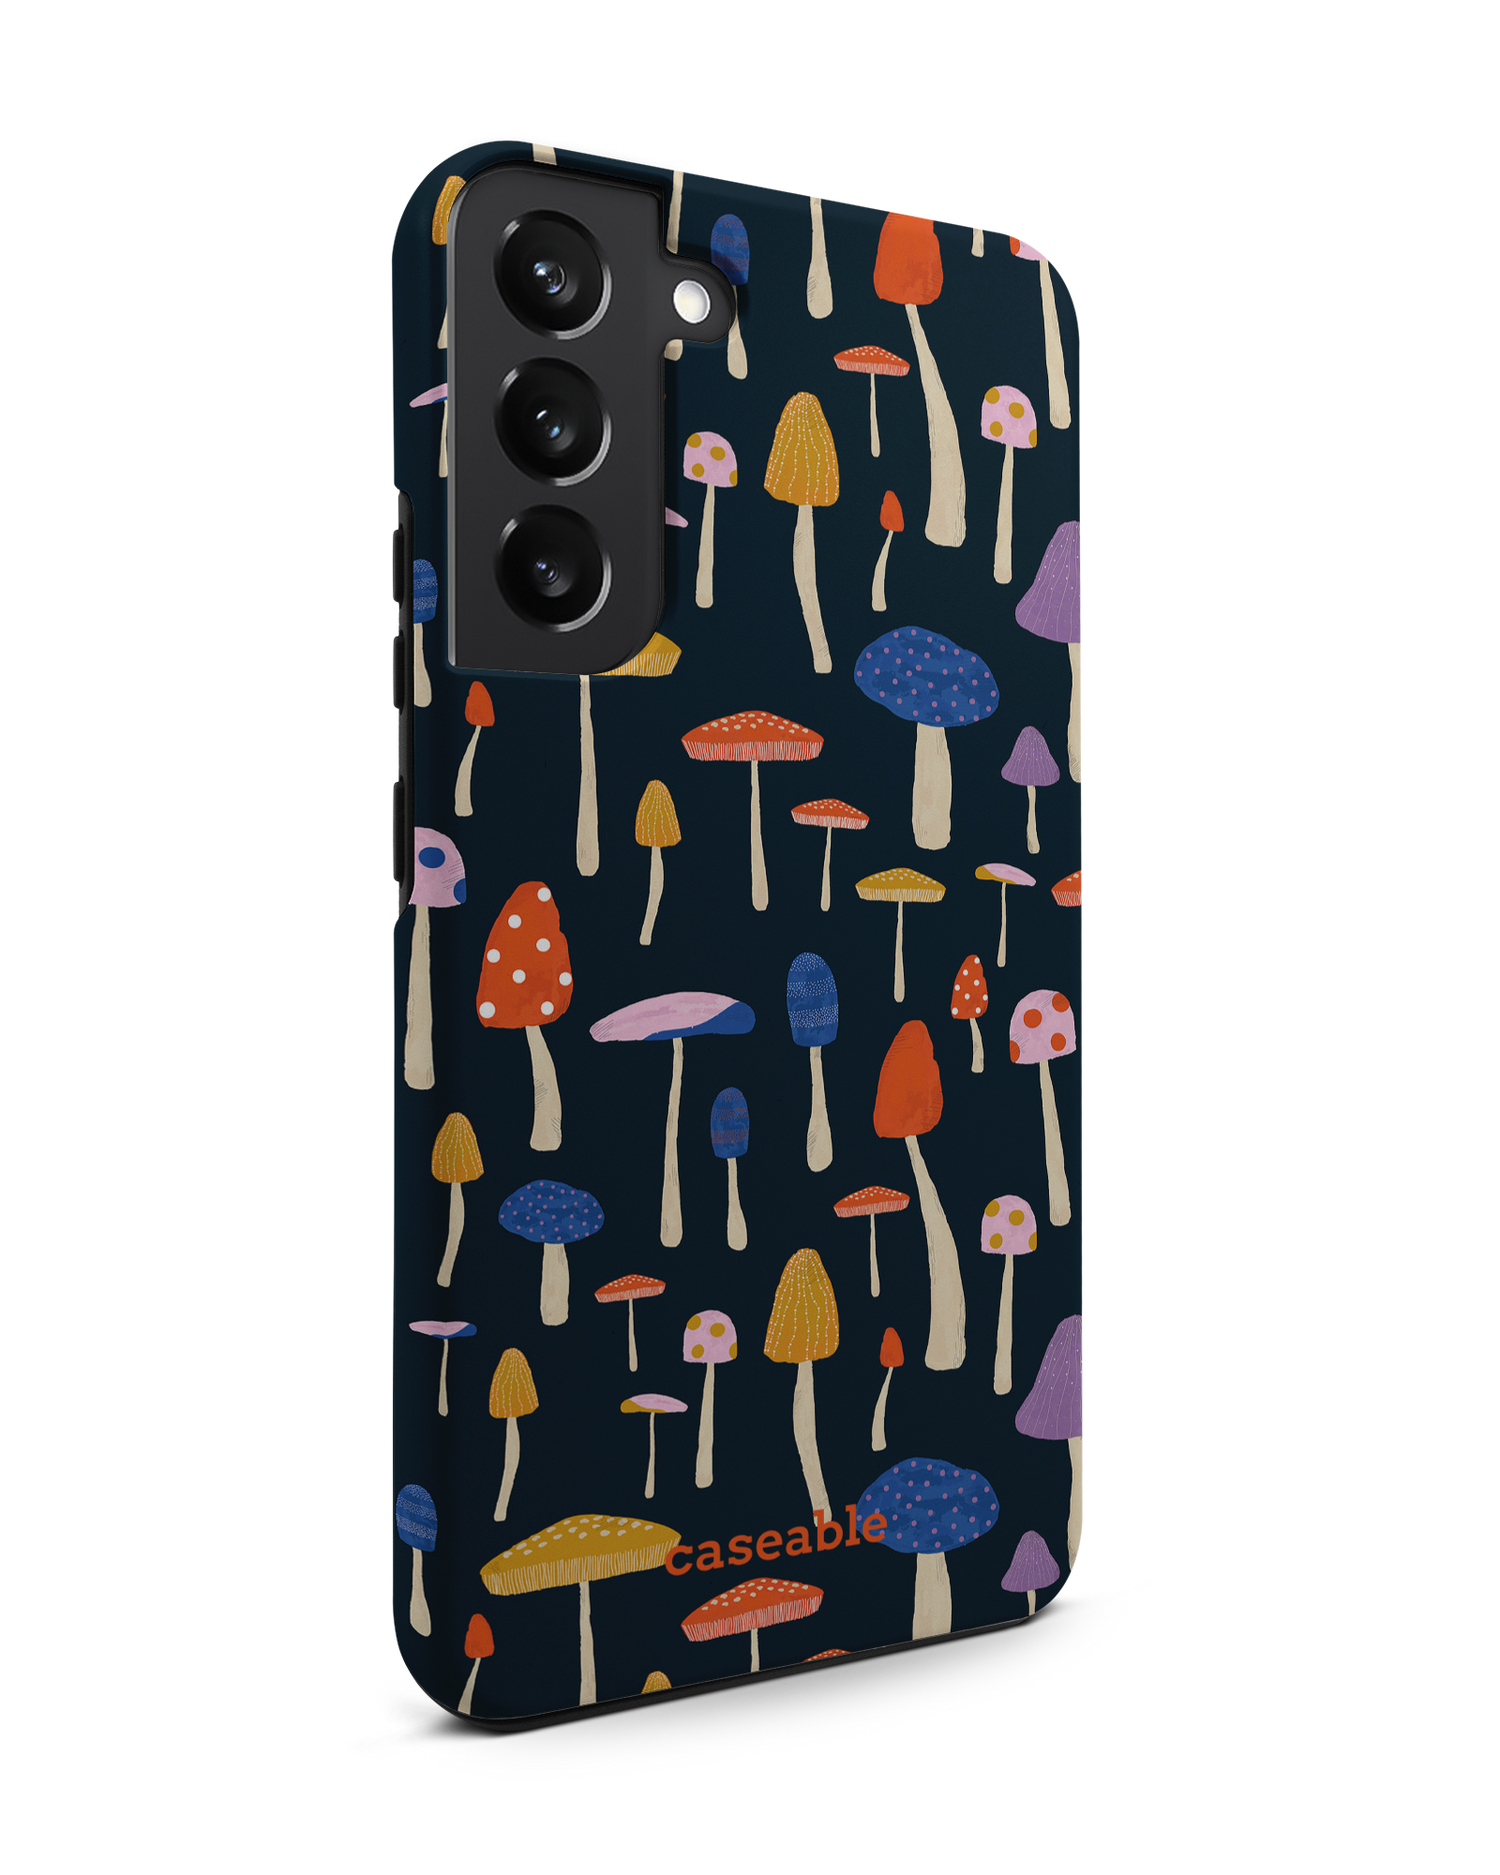 Mushroom Delights Premium Phone Case Samsung Galaxy S22 Plus 5G: View from the left side